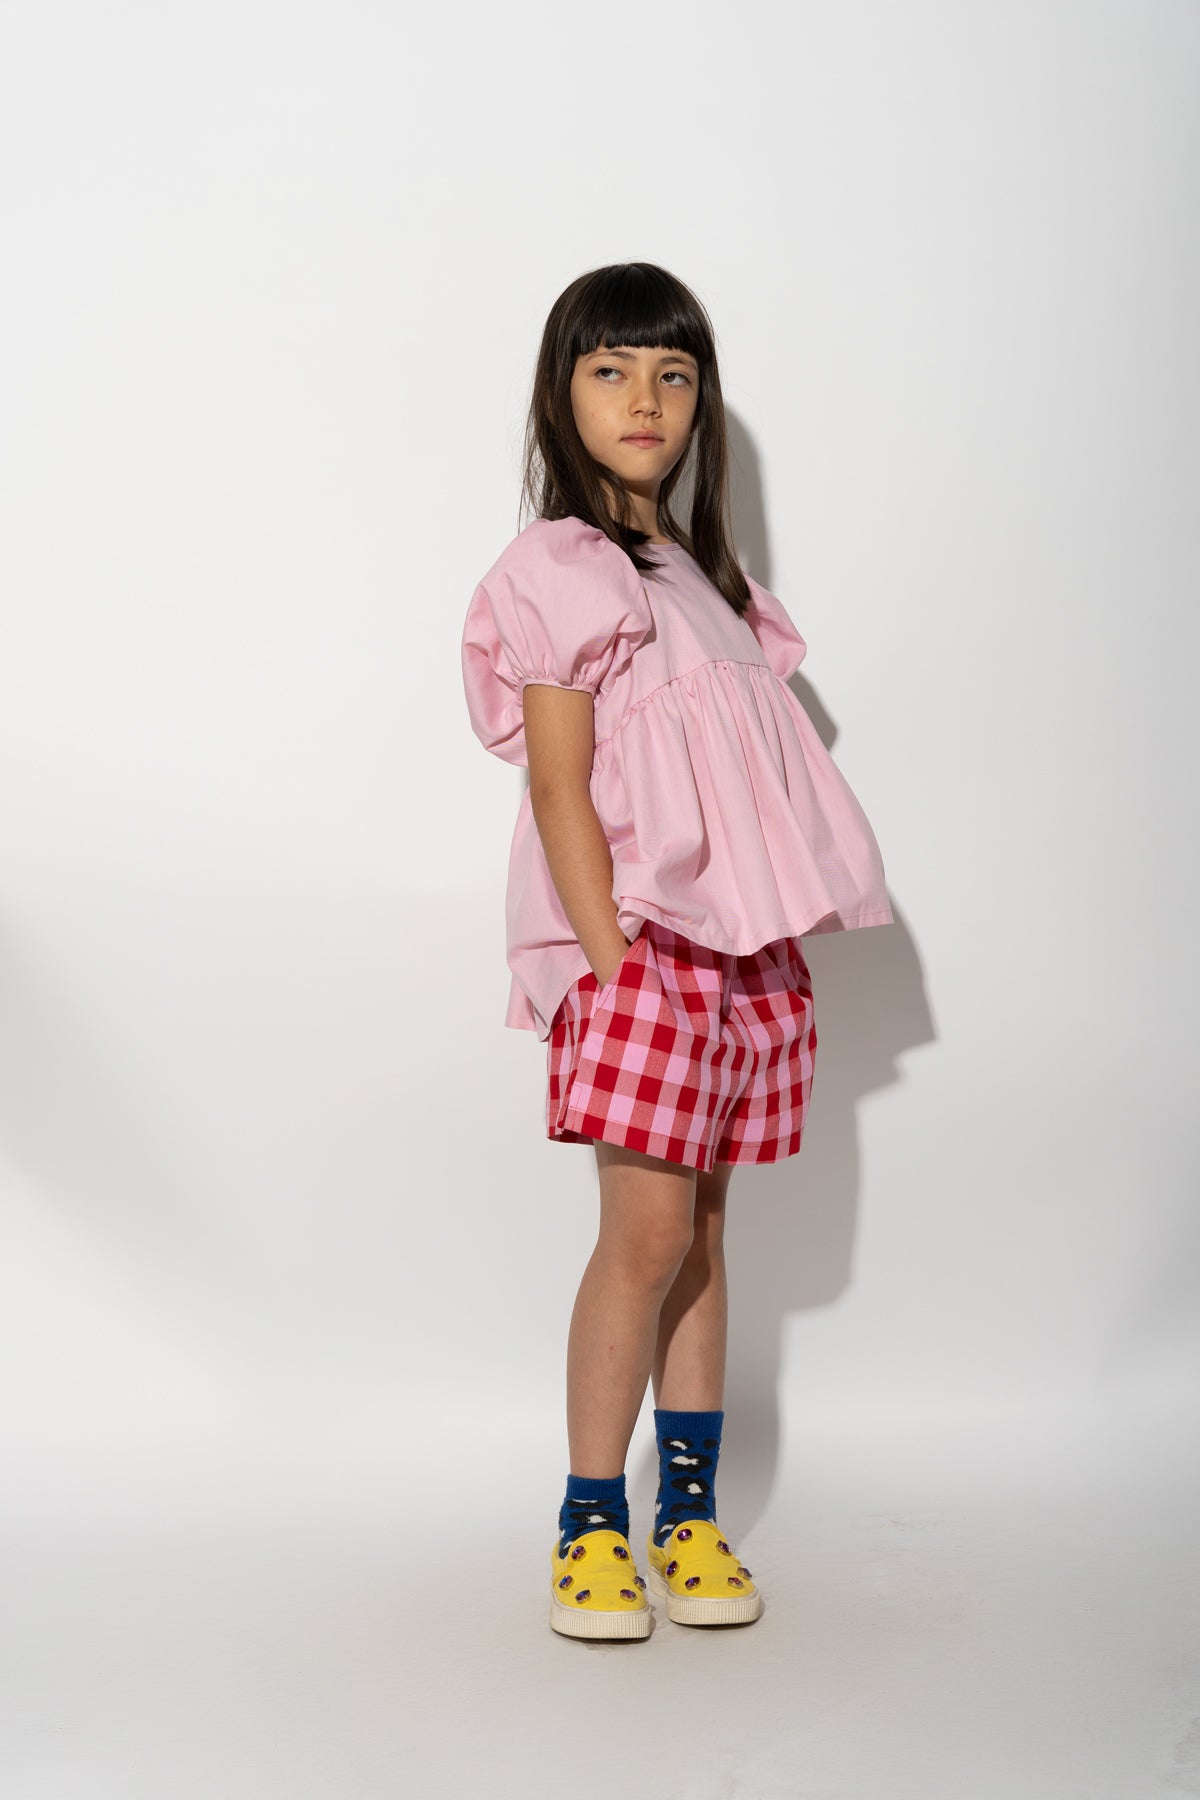 RED AND PINK GINGHAM BOXER SHORTS makids